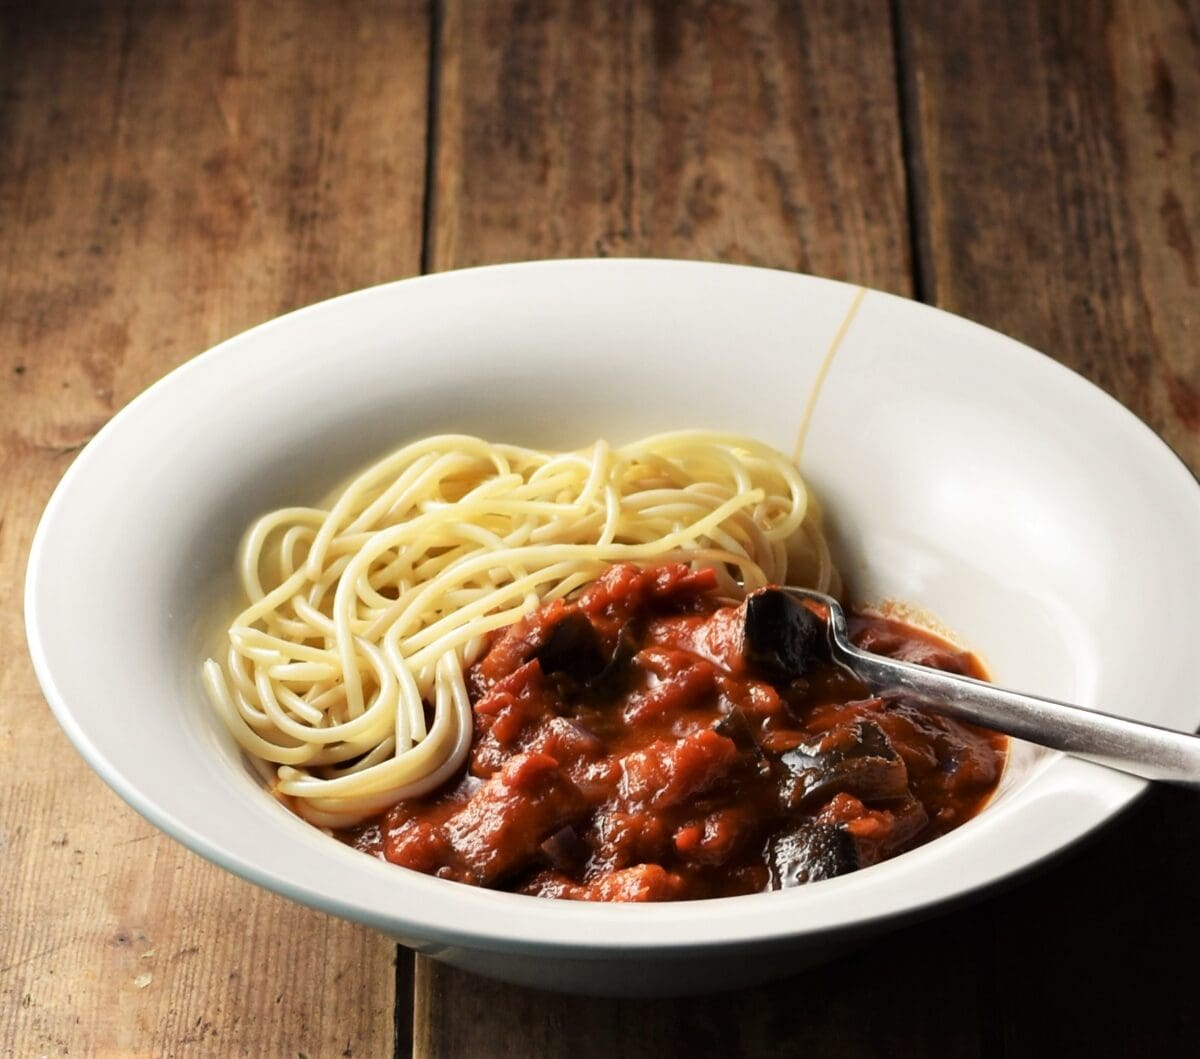 Eggplant tomato sauce with spaghetti in white bowl with fork.